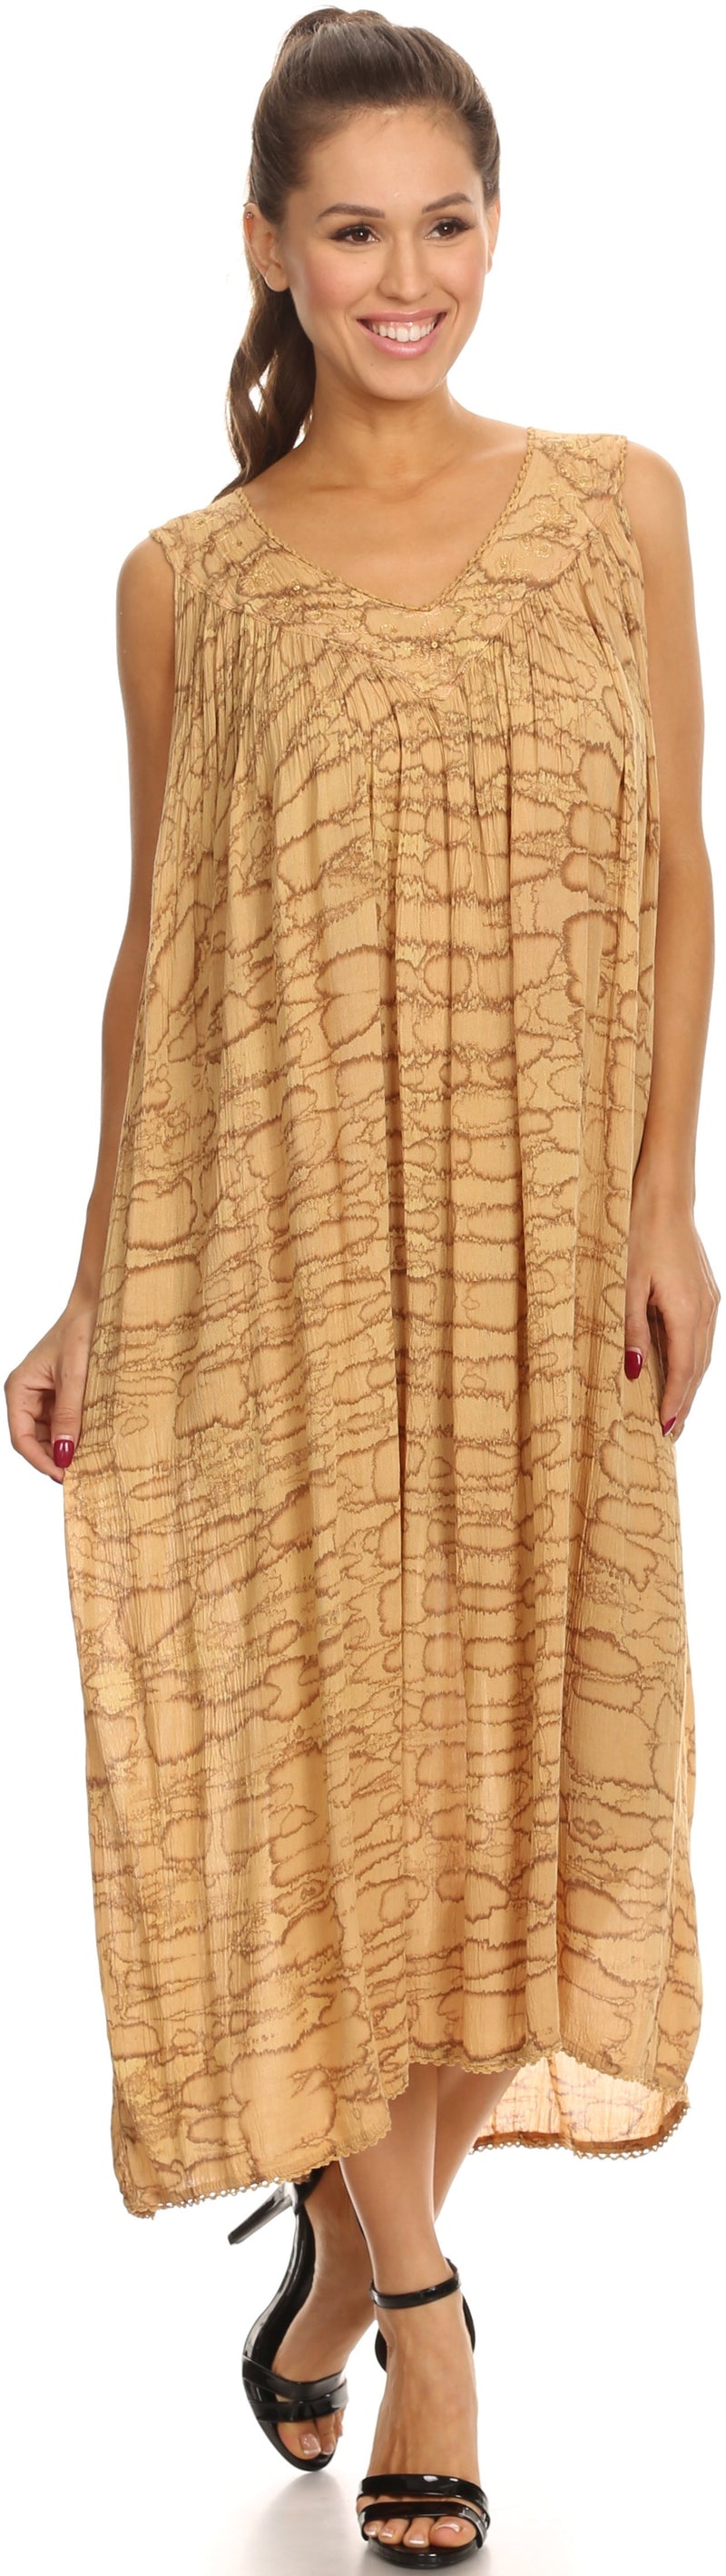 Sakkas Adele Sequin Embroidered Scoop Neck Sleeveless Dress / Cover Up